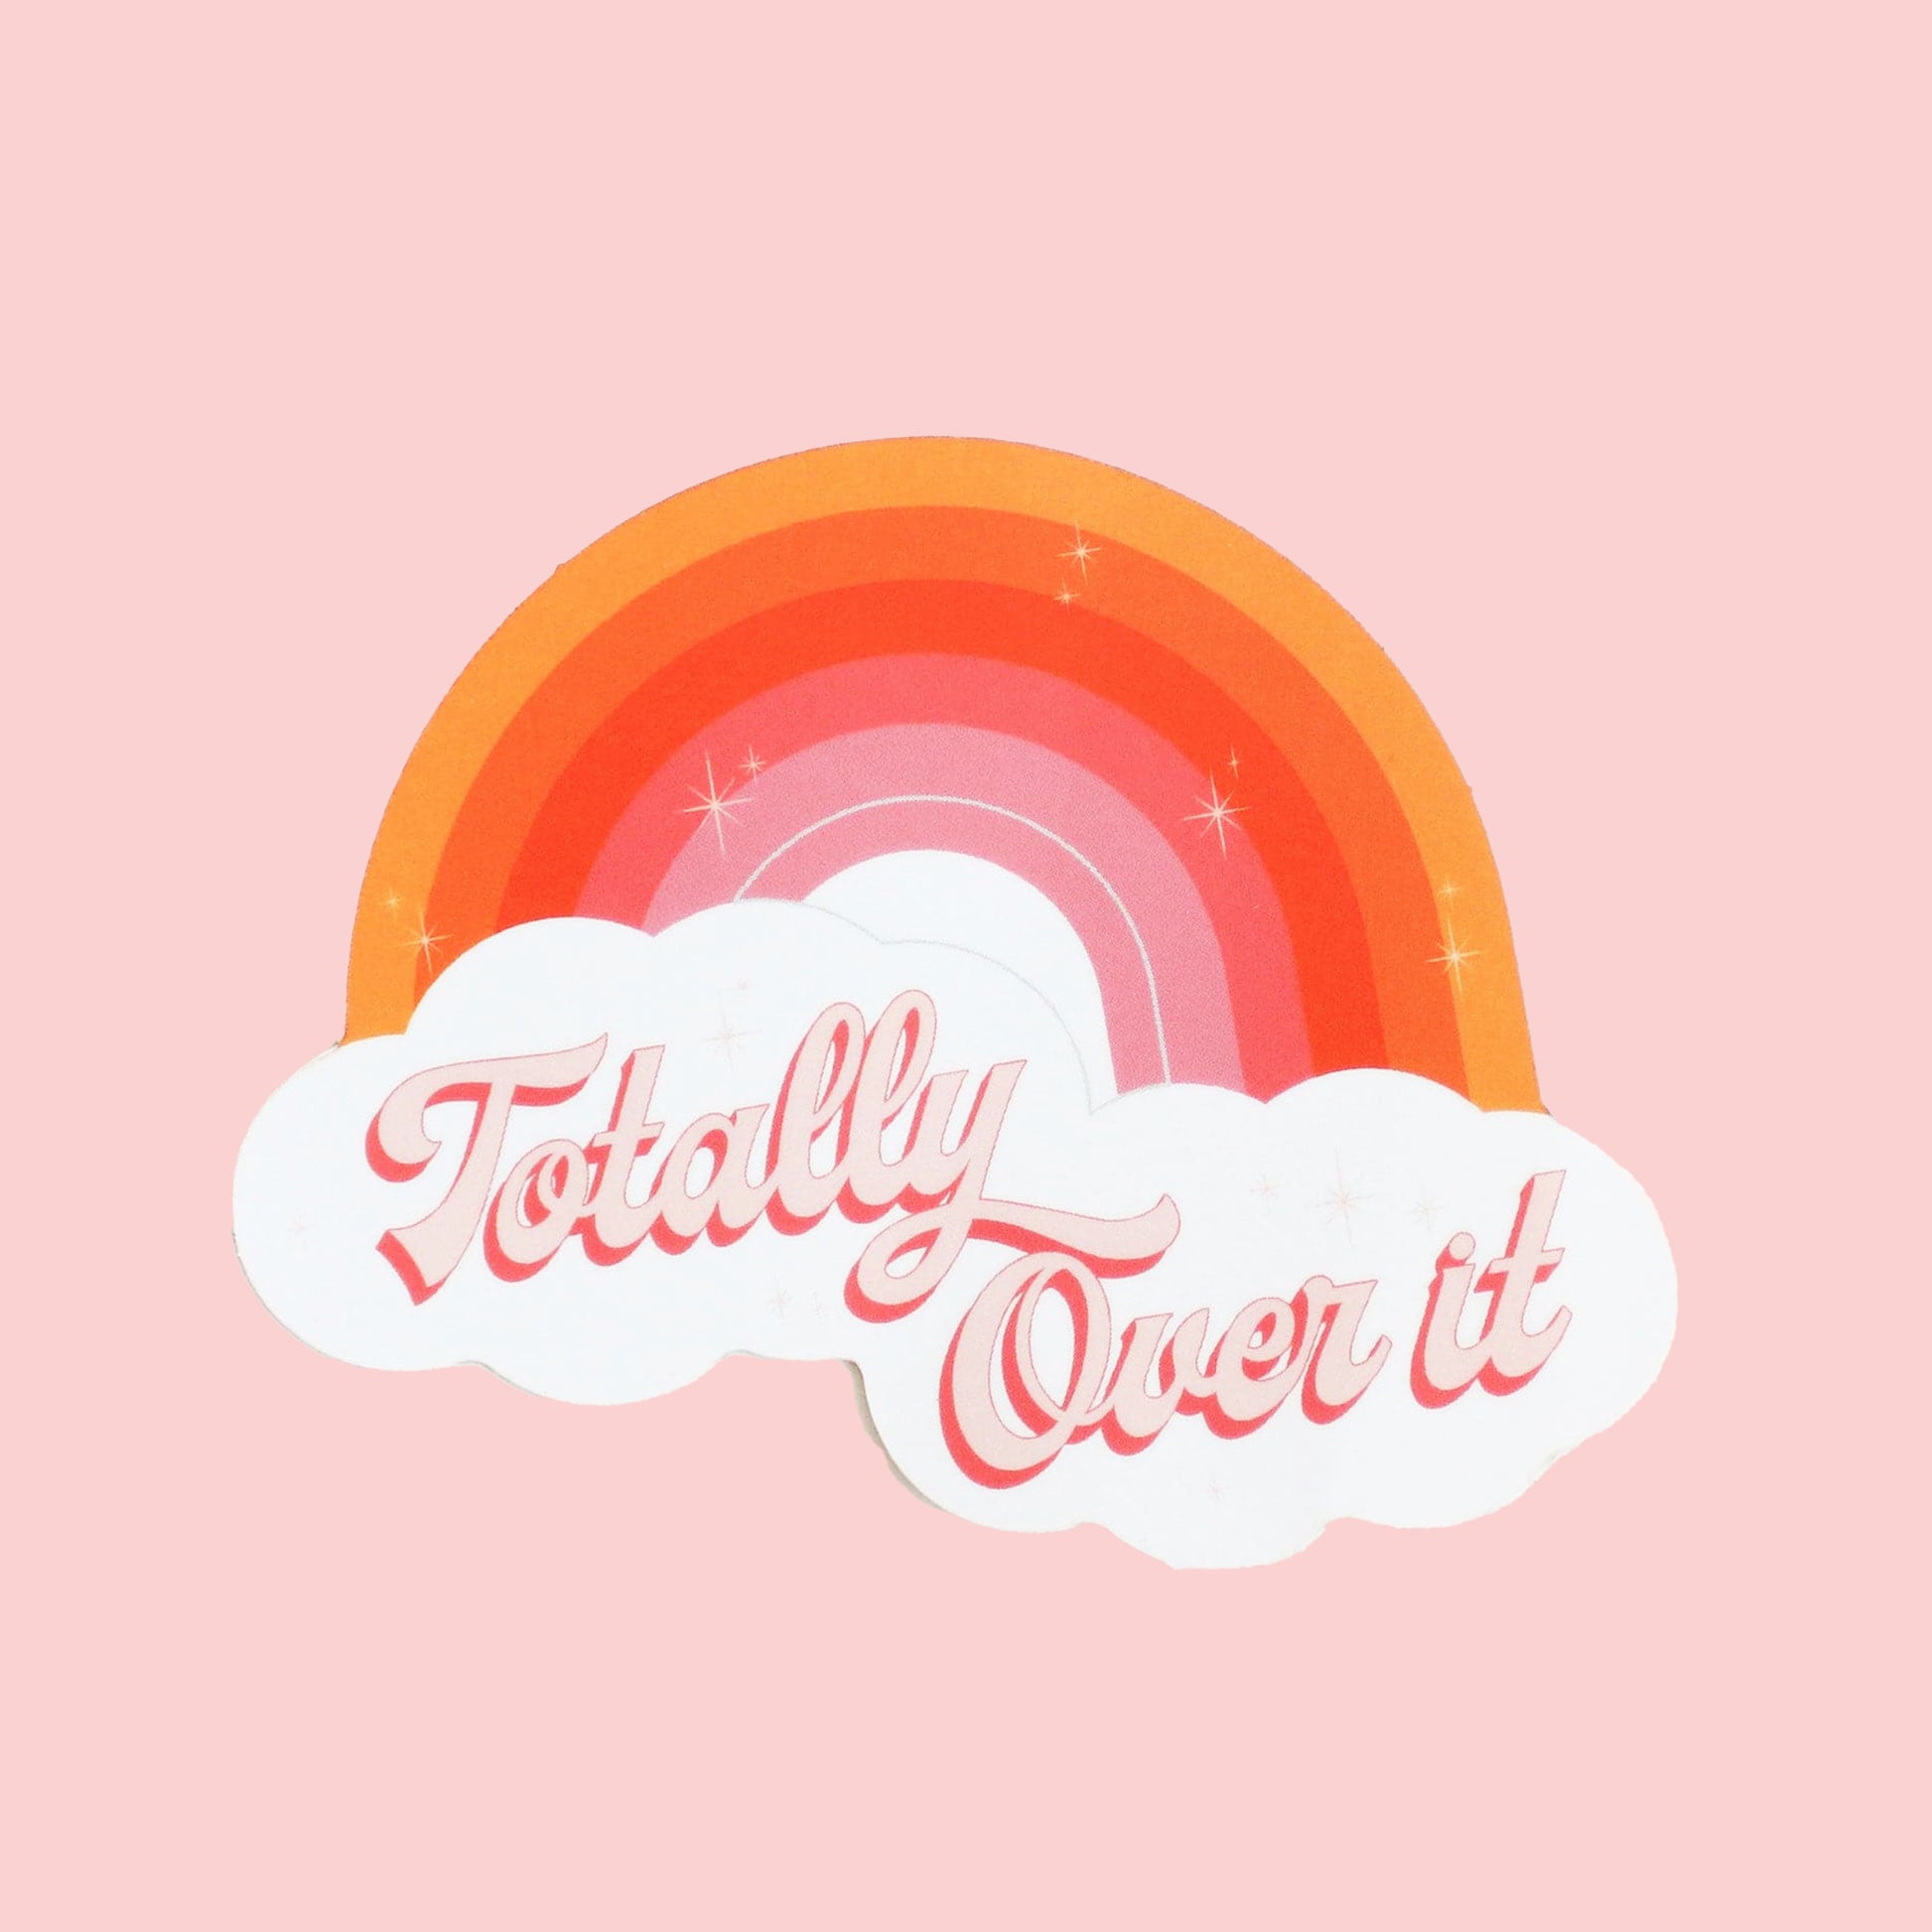 Bright rainbow designed sticker with orange sunset hues. This sticker reads 'Totally Over It' in pink cursive lettering below the rainbow in white clouds.